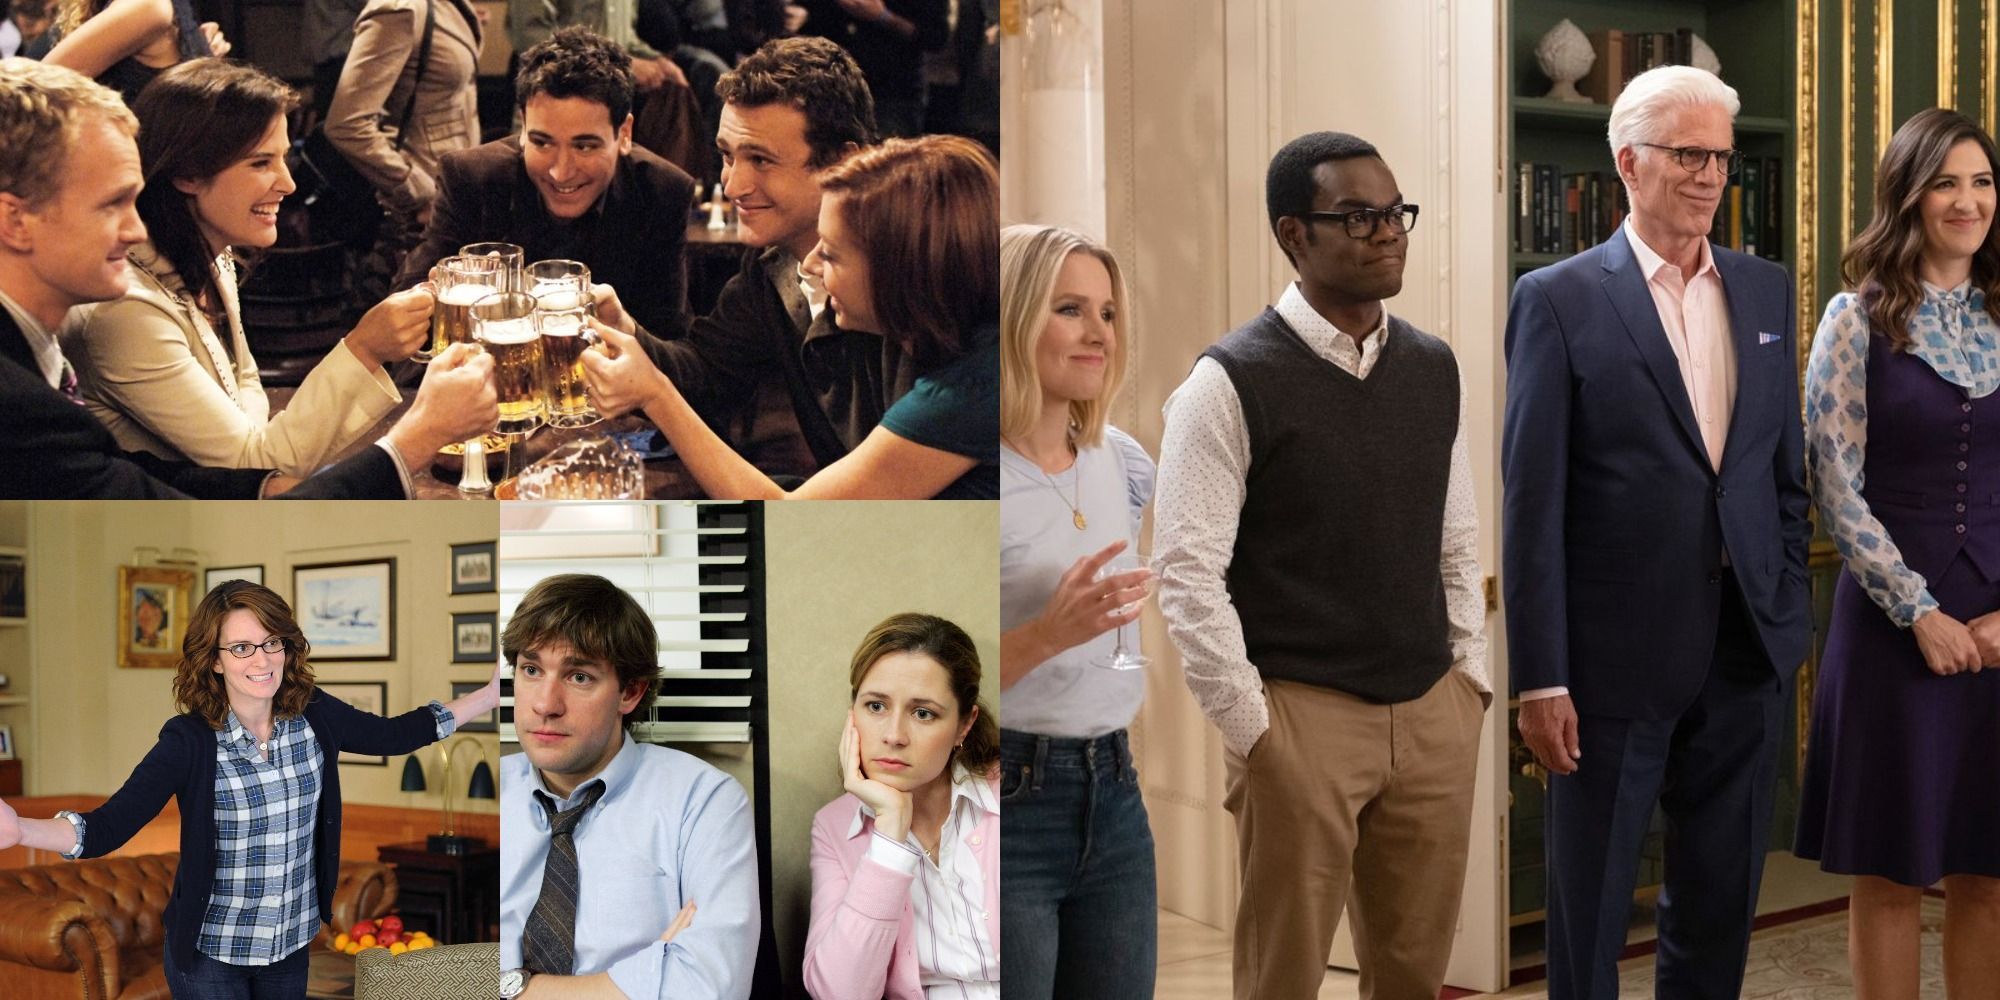 Sitcom Collage: HIMYM, 30 Rock, The Office, The Good Place